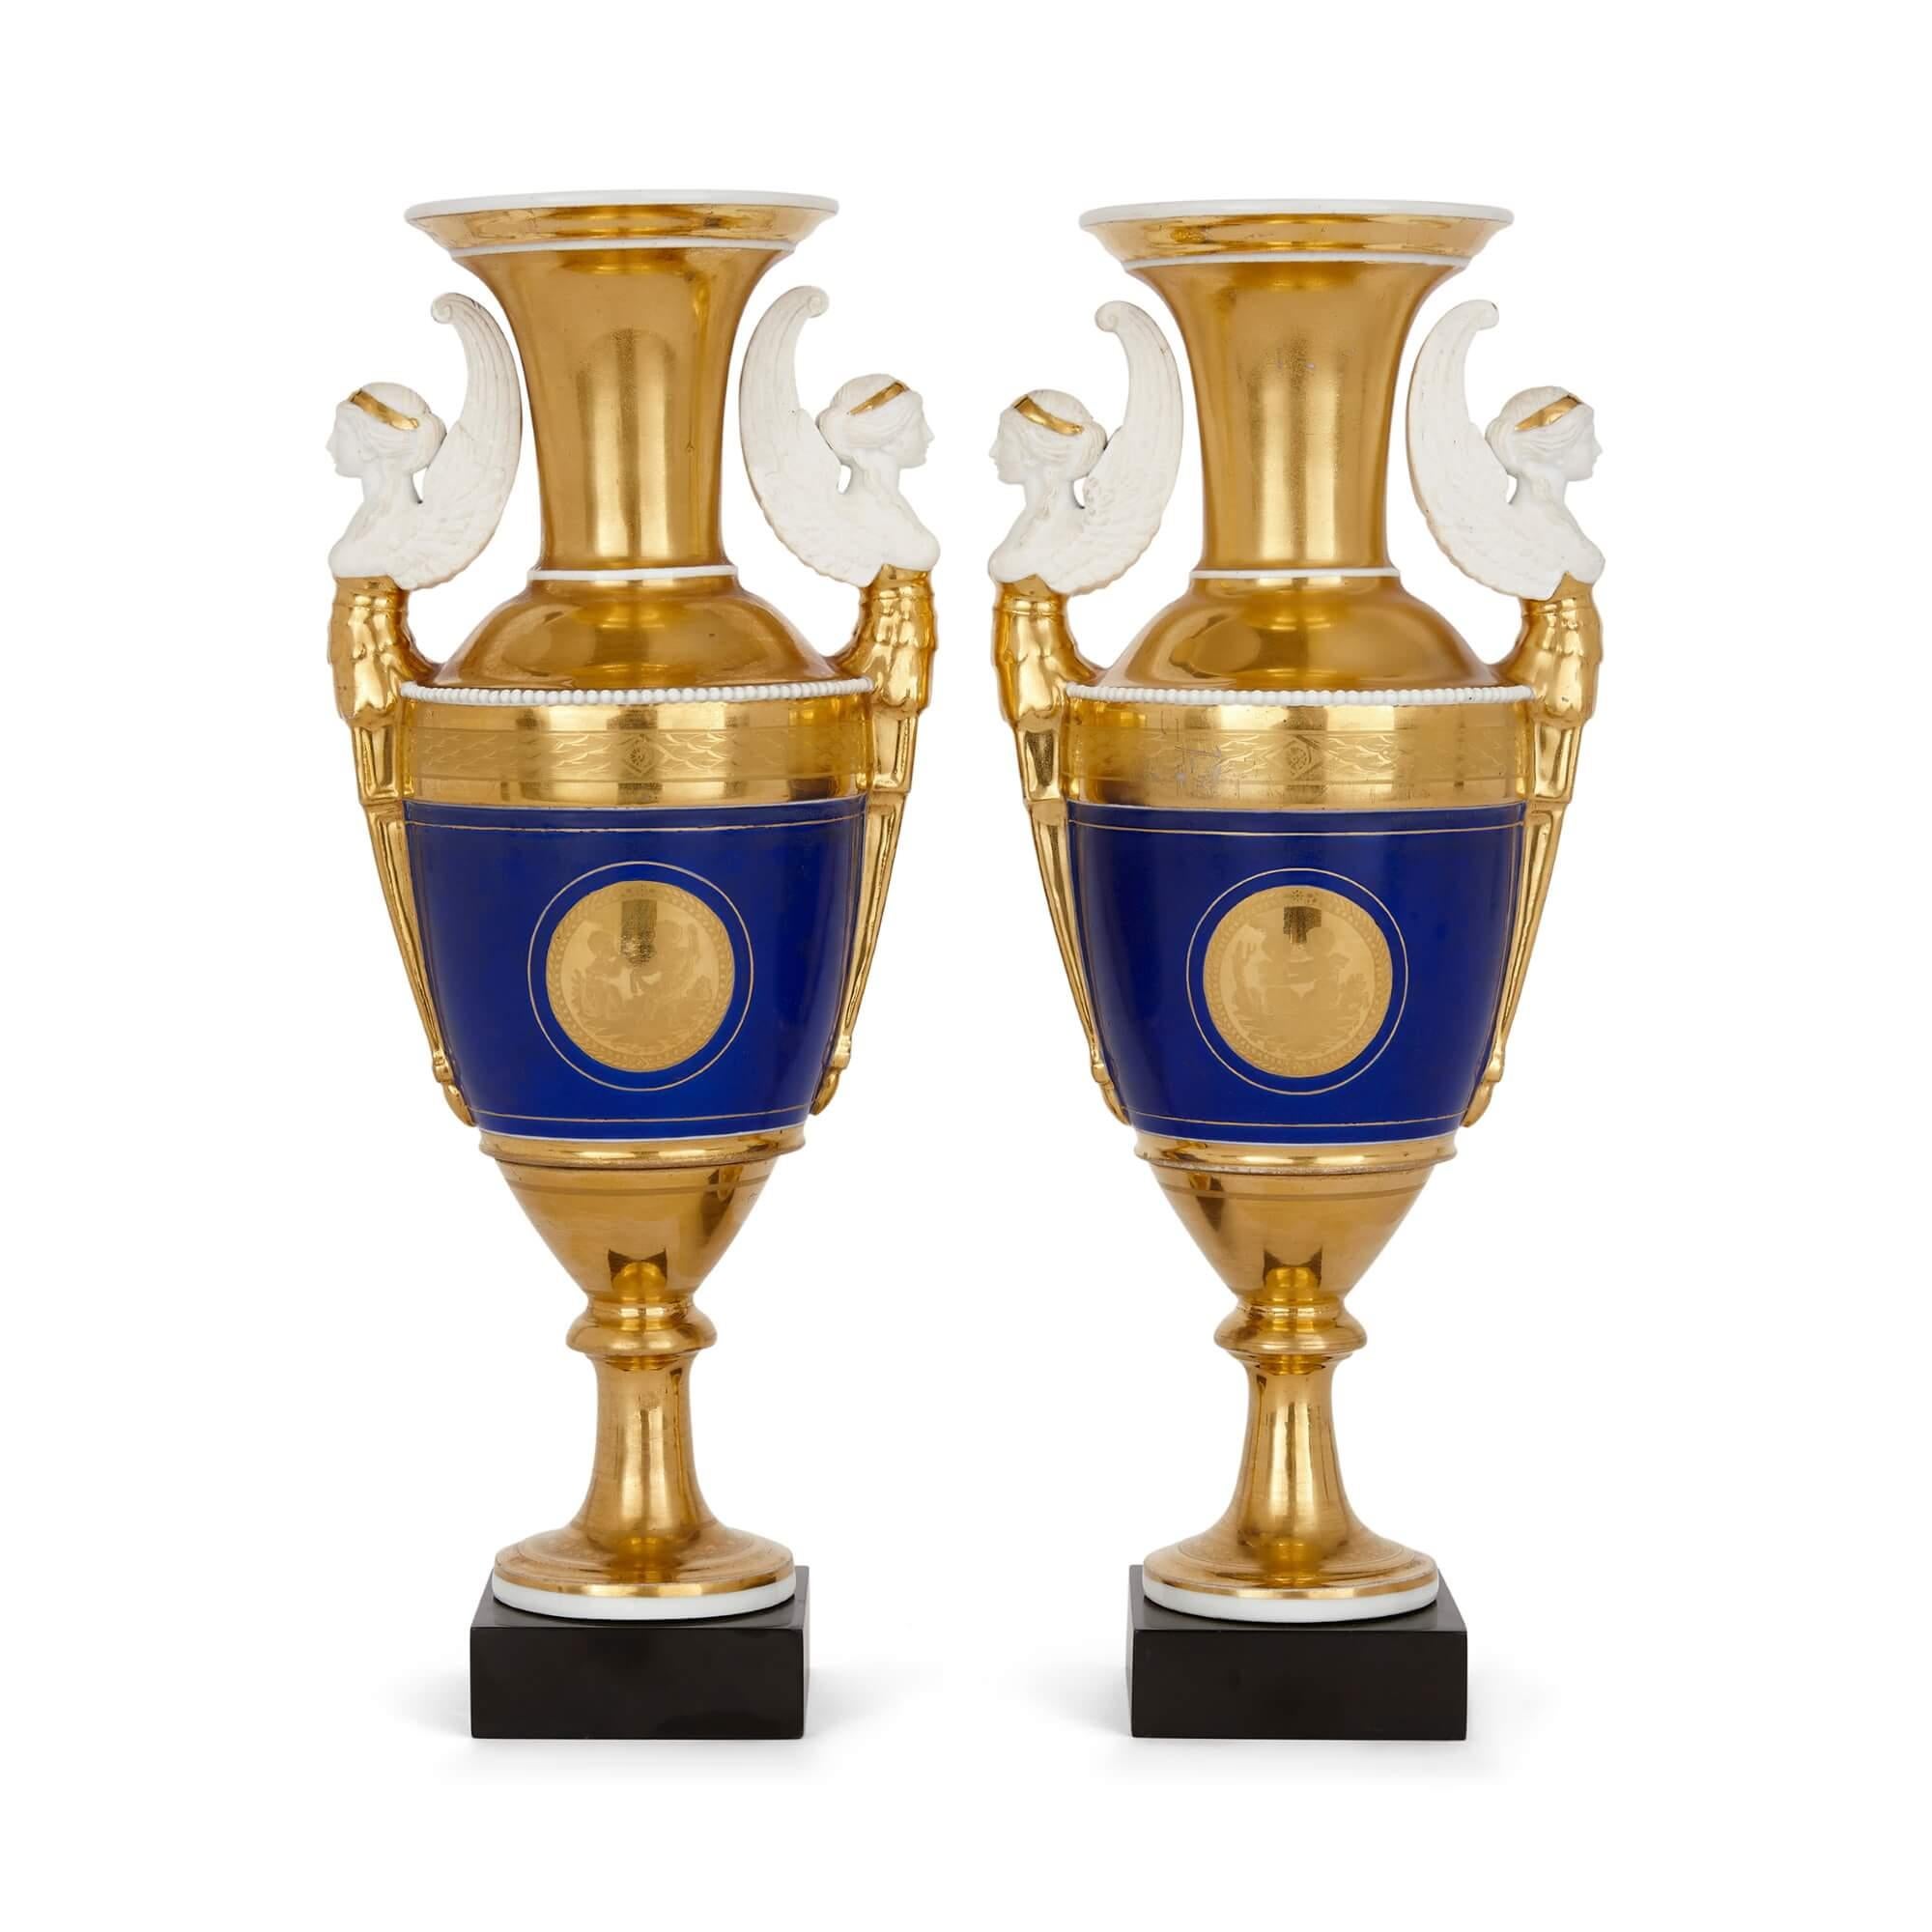 French Pair of Neoclassical Paris Porcelain Two-Handled Oviform Vases